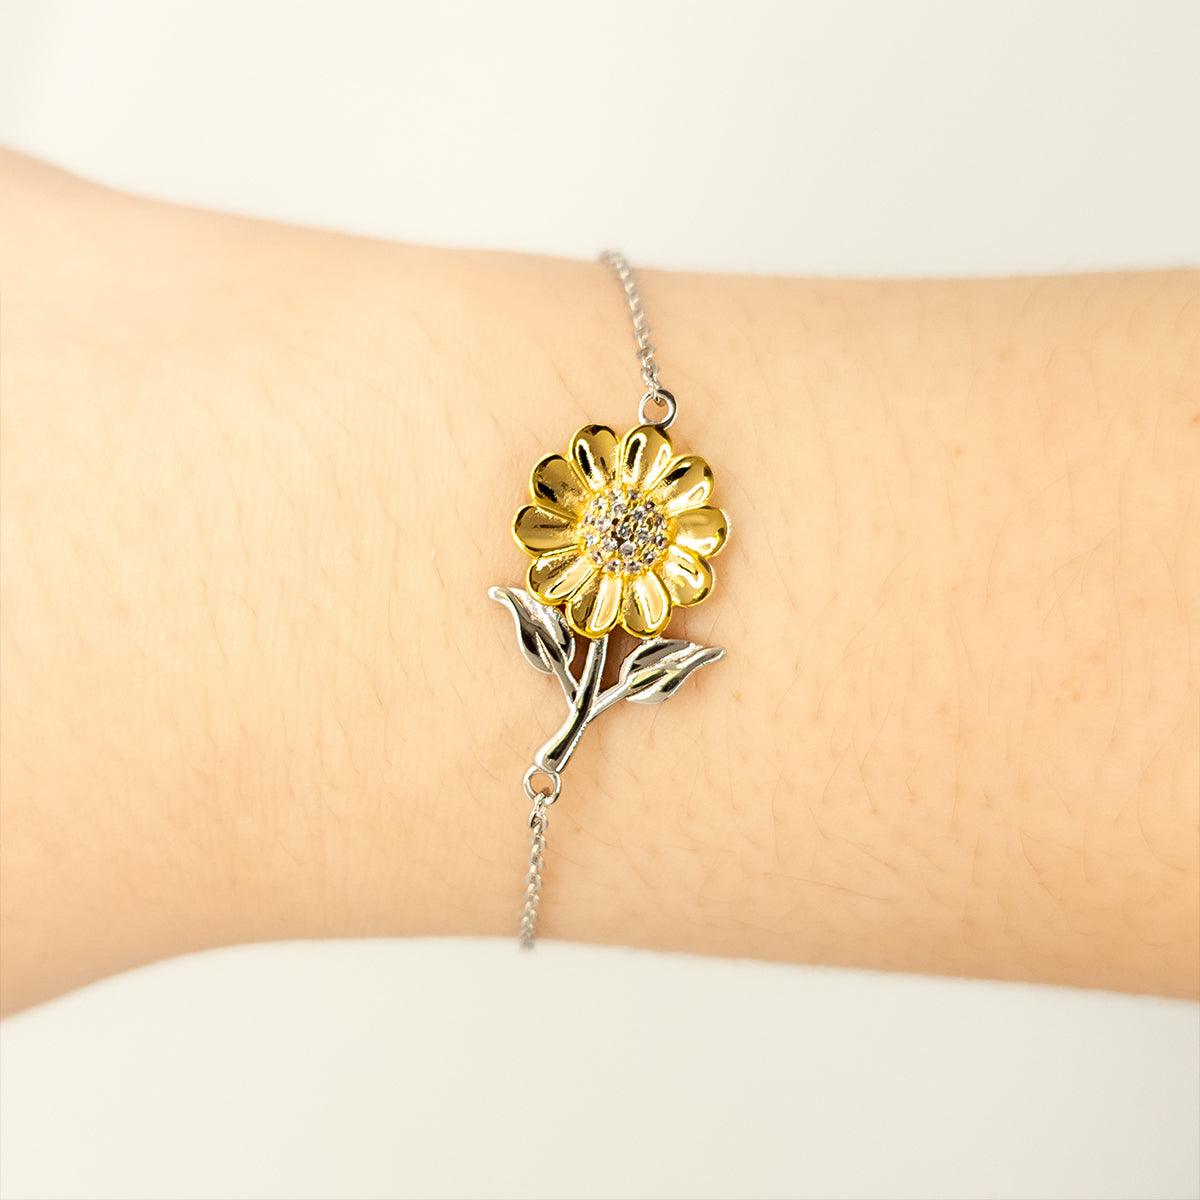 Remarkable Executive Assistant Gifts, Your dedication and hard work, Inspirational Birthday Christmas Unique Sunflower Bracelet For Executive Assistant, Coworkers, Men, Women, Friends - Mallard Moon Gift Shop